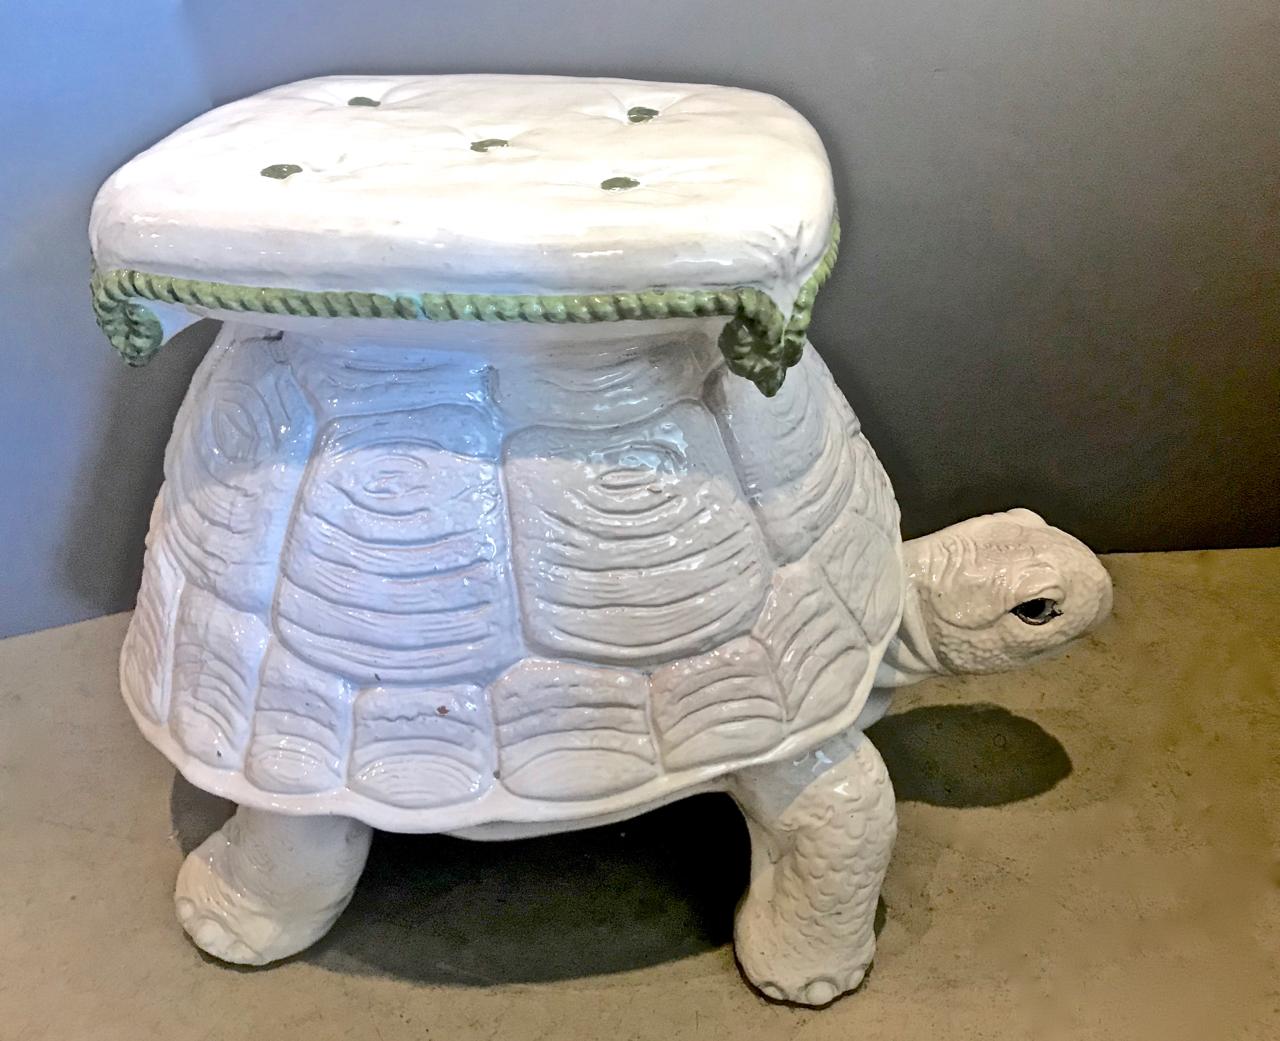 This is a very decorative Italian terracotta stool in the form of a turtle or tortoise. The stool dates to circa 1980 and is in very good to excellent condition. Although intended for garden use, he would make a wonderful beside-the-tub stool. In